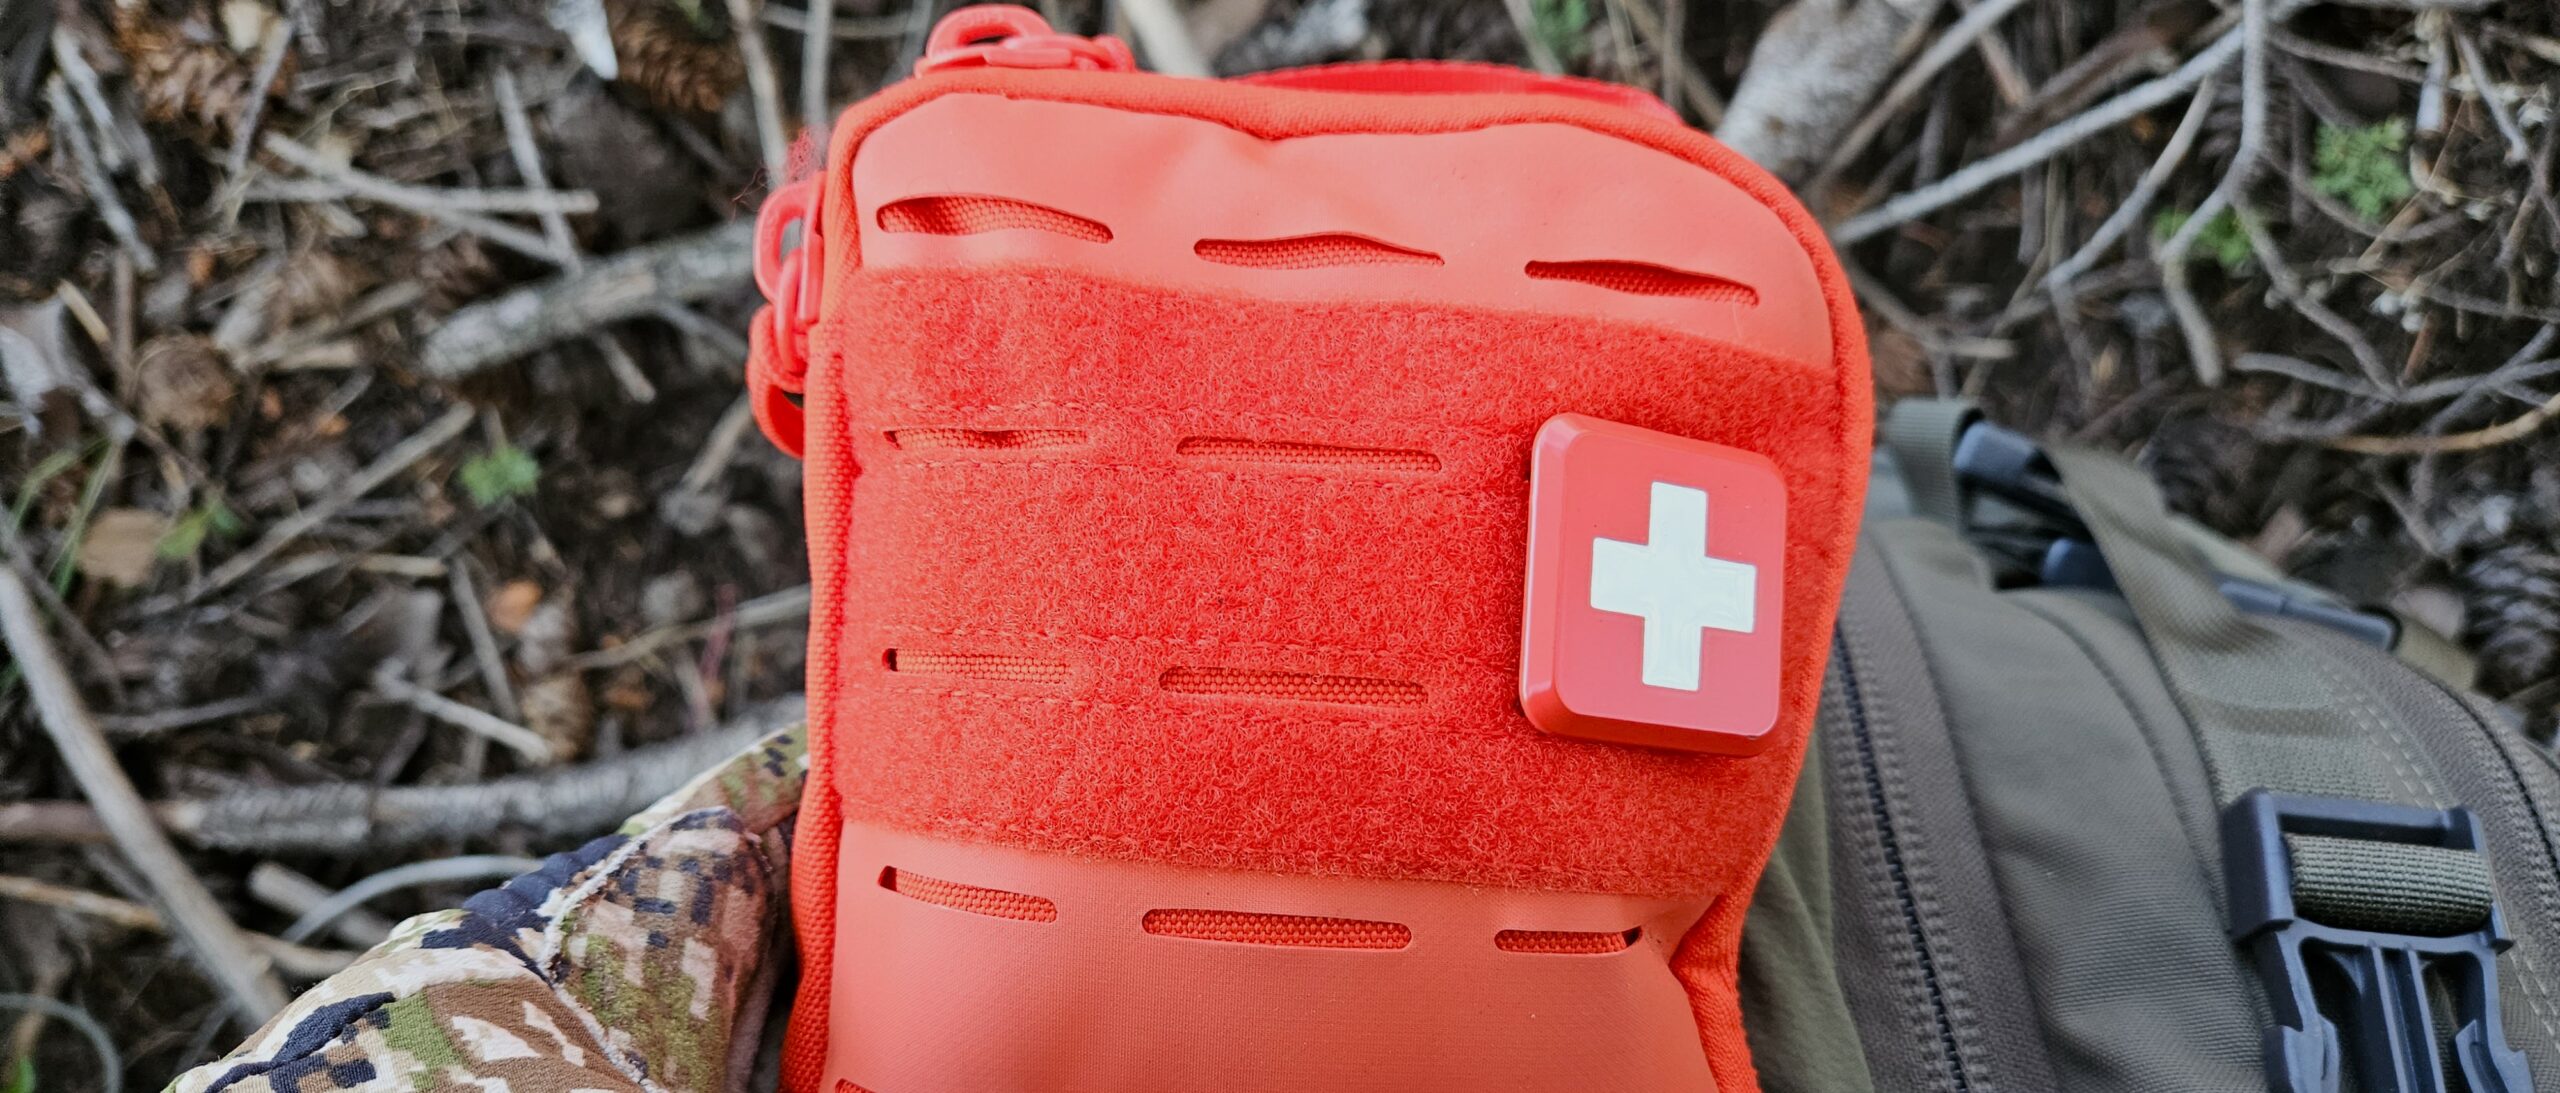 My Medic Review  BEST Backpacking, Hunting, Hiking FIRST AID KIT